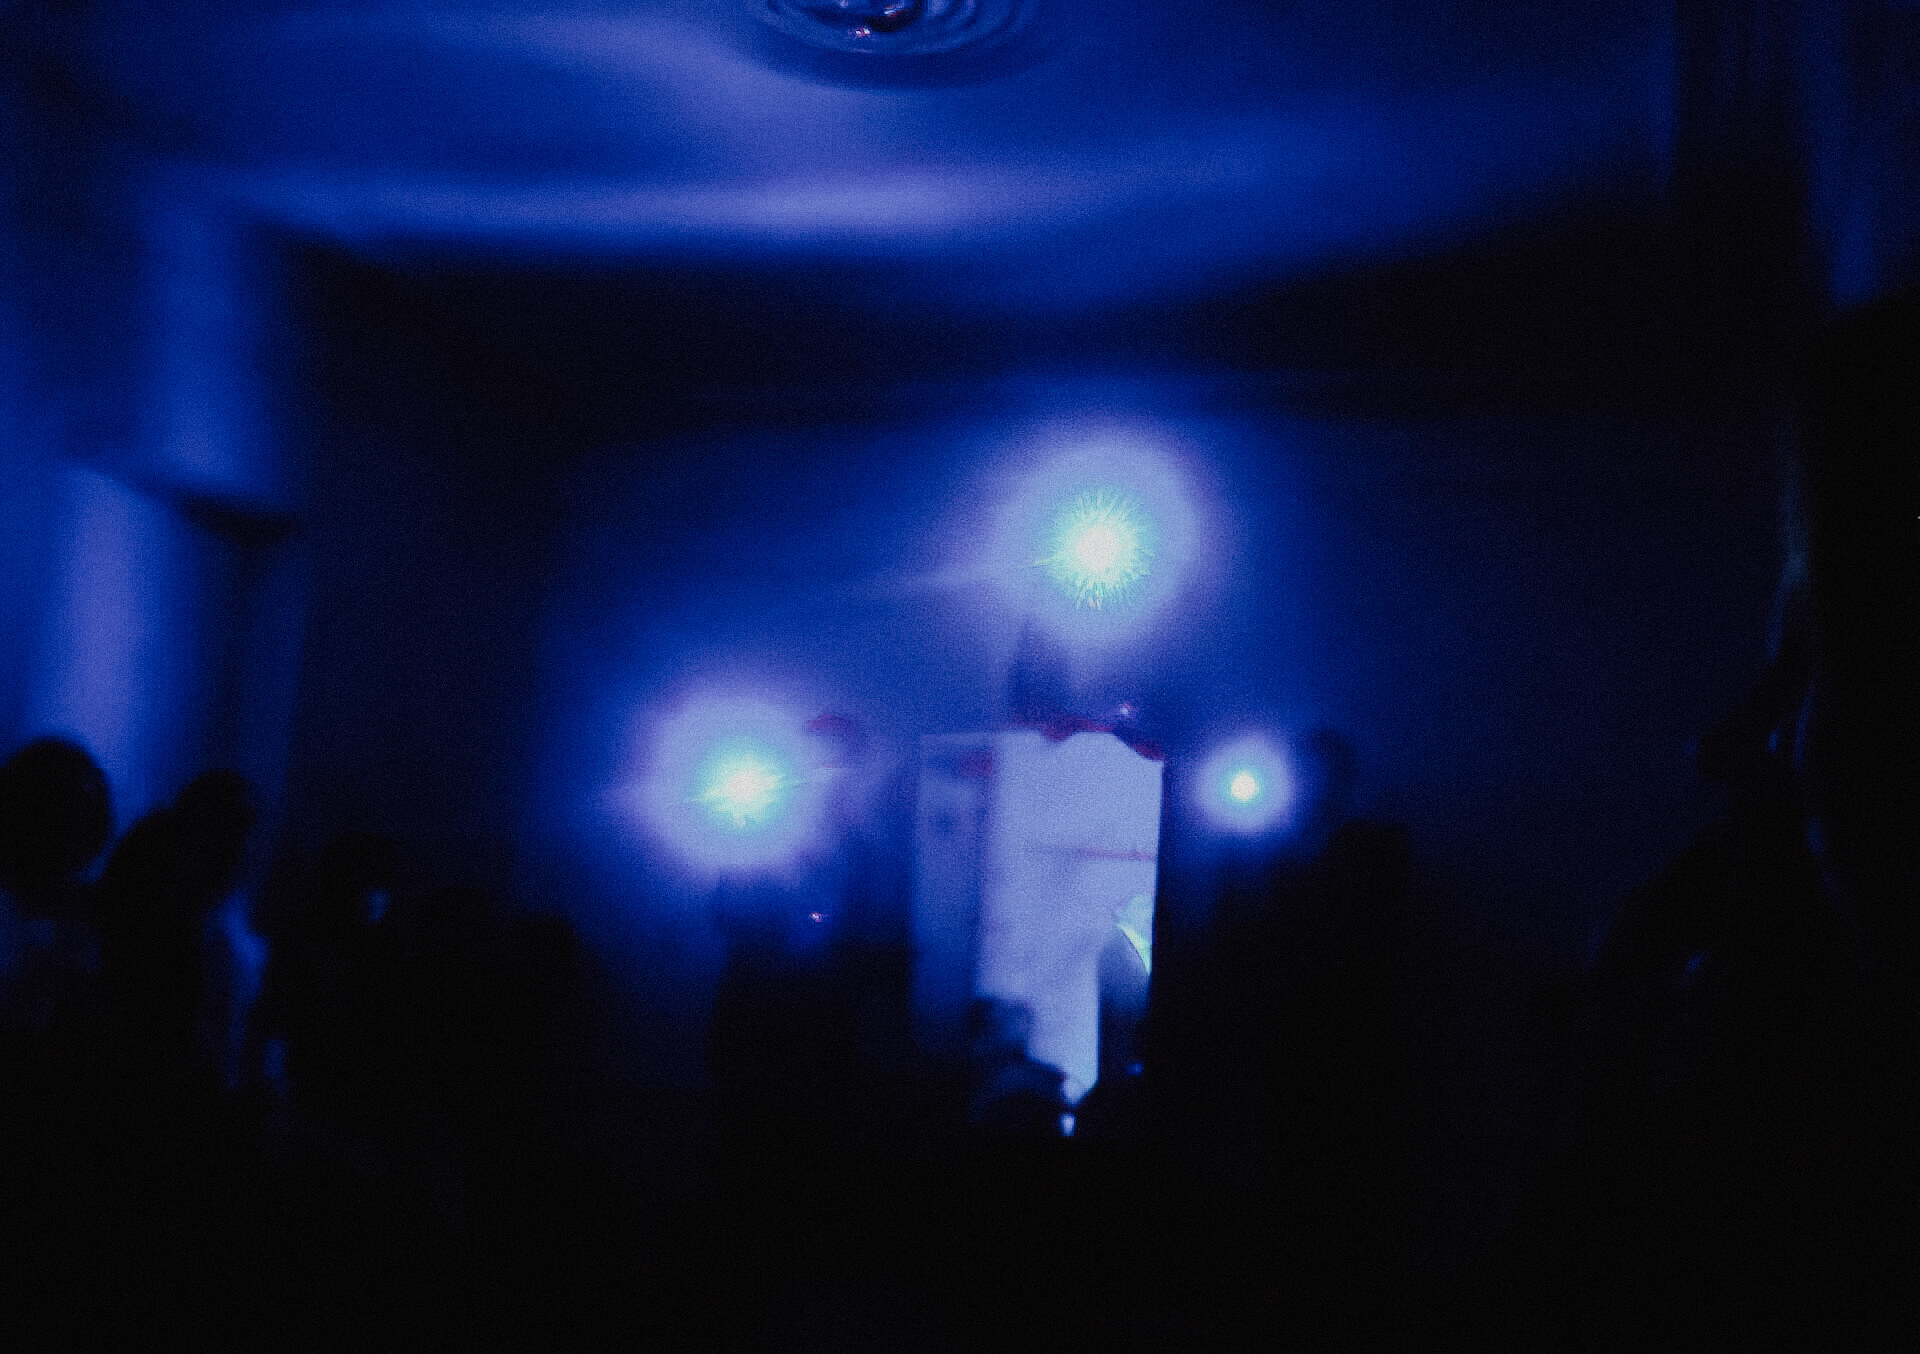 Blurry image of a dark room and three performers each holding light